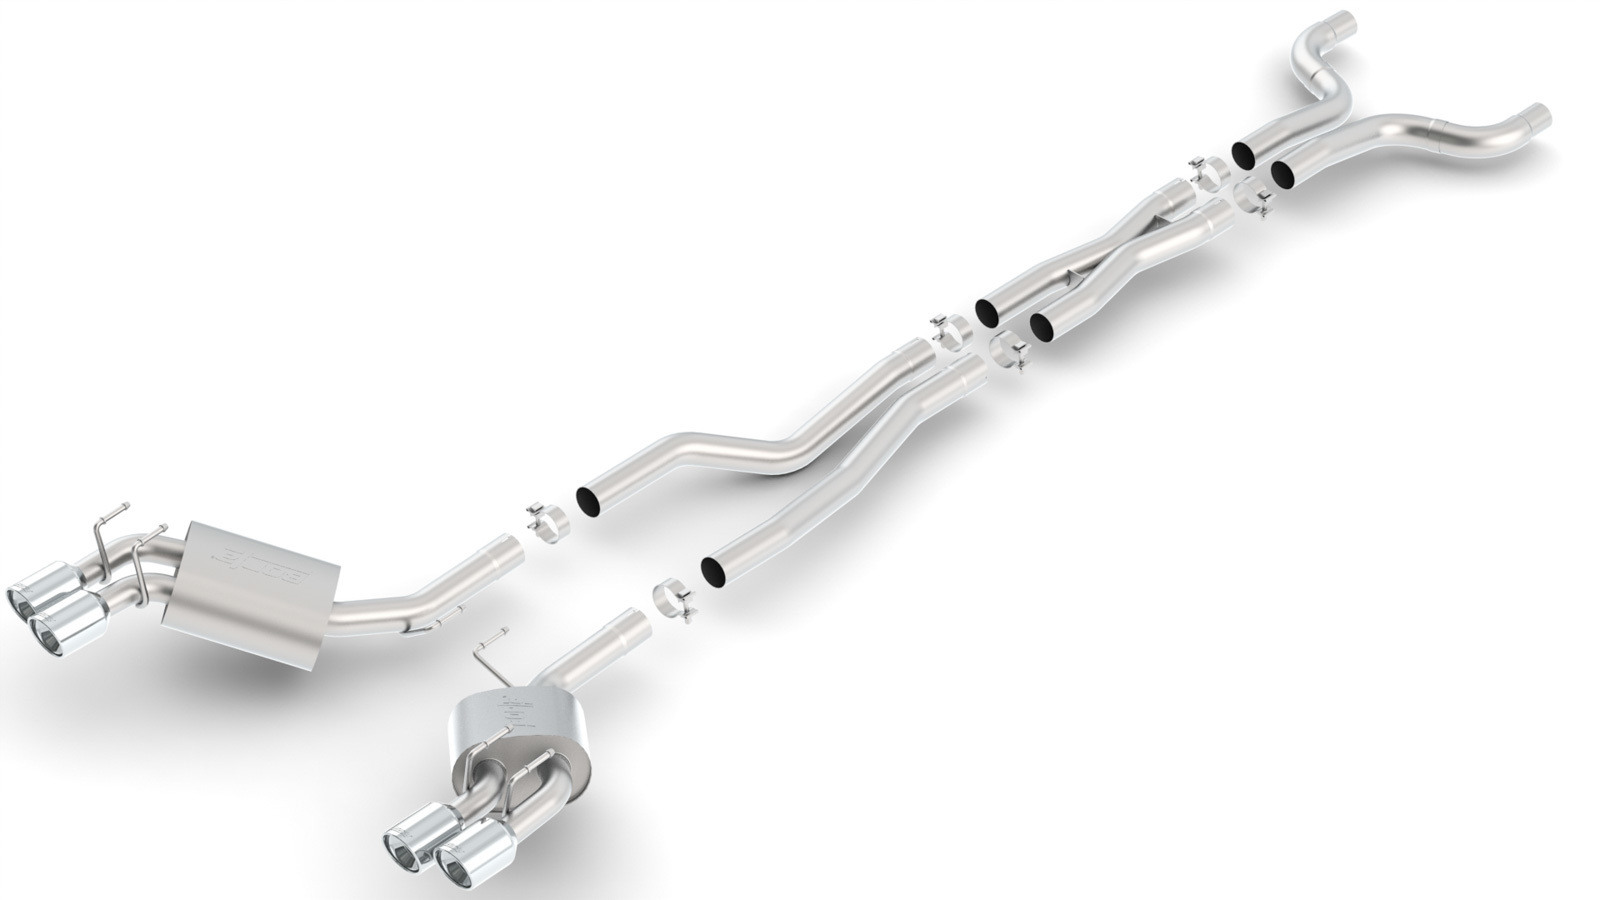 Camaro 2012-15 ZL1 BORLA Exhaust System, S-Type, Cat-Back, 2-3/4 in Tailpipe, 4 in Tips, Stainless, Natural